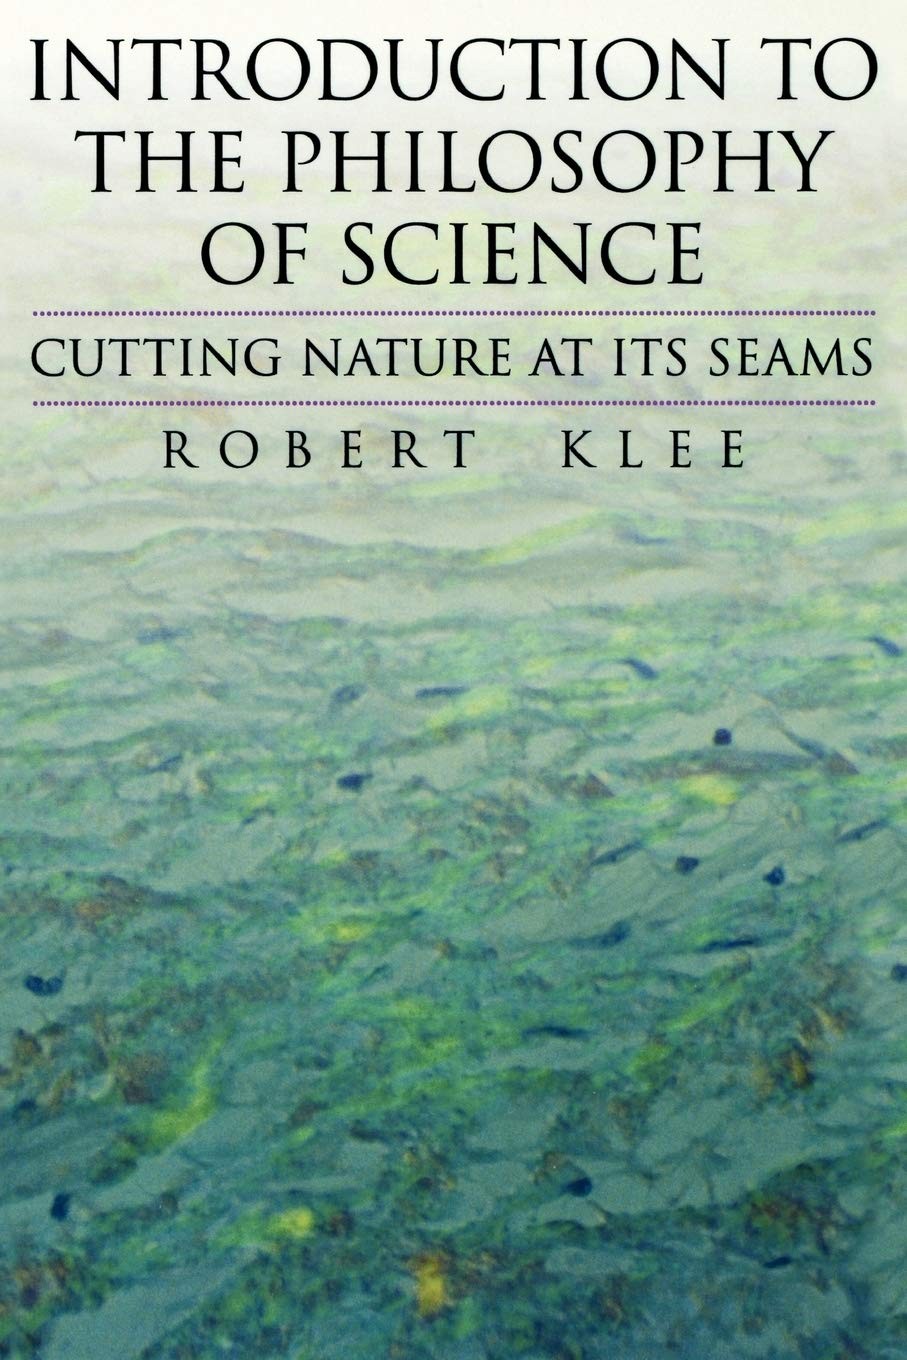 Introduction to the Philosophy of Science: Cutting Nature at Its Seams